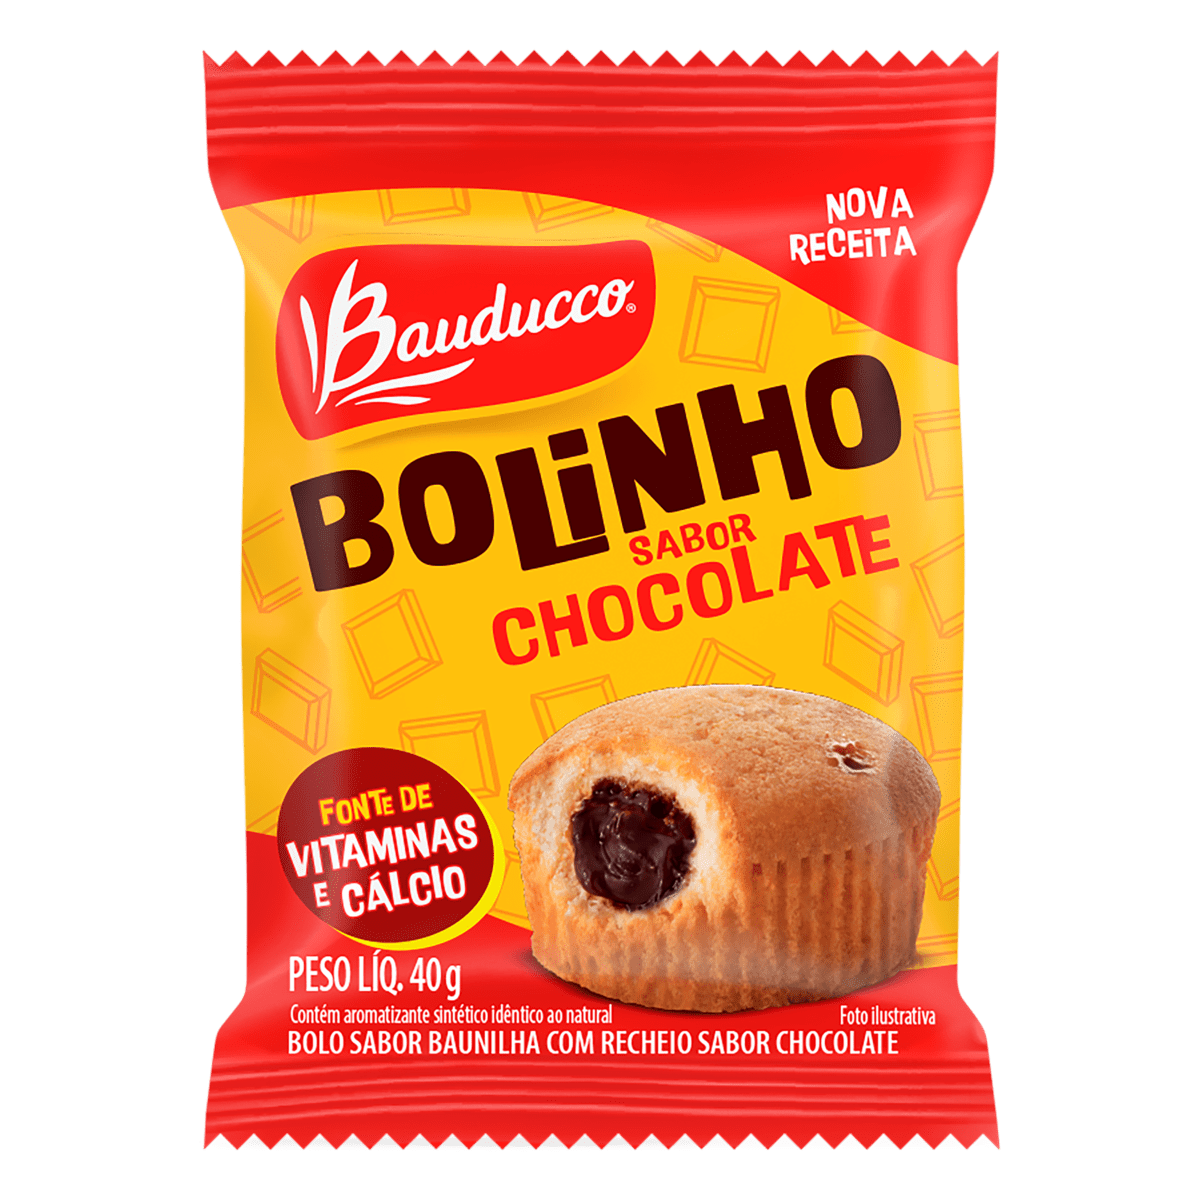 BAUDUCCO - Vanila Cupcake with chocolate filling - 40g - FINAL SALE - EXPIRED or CLOSE TO EXPIRY